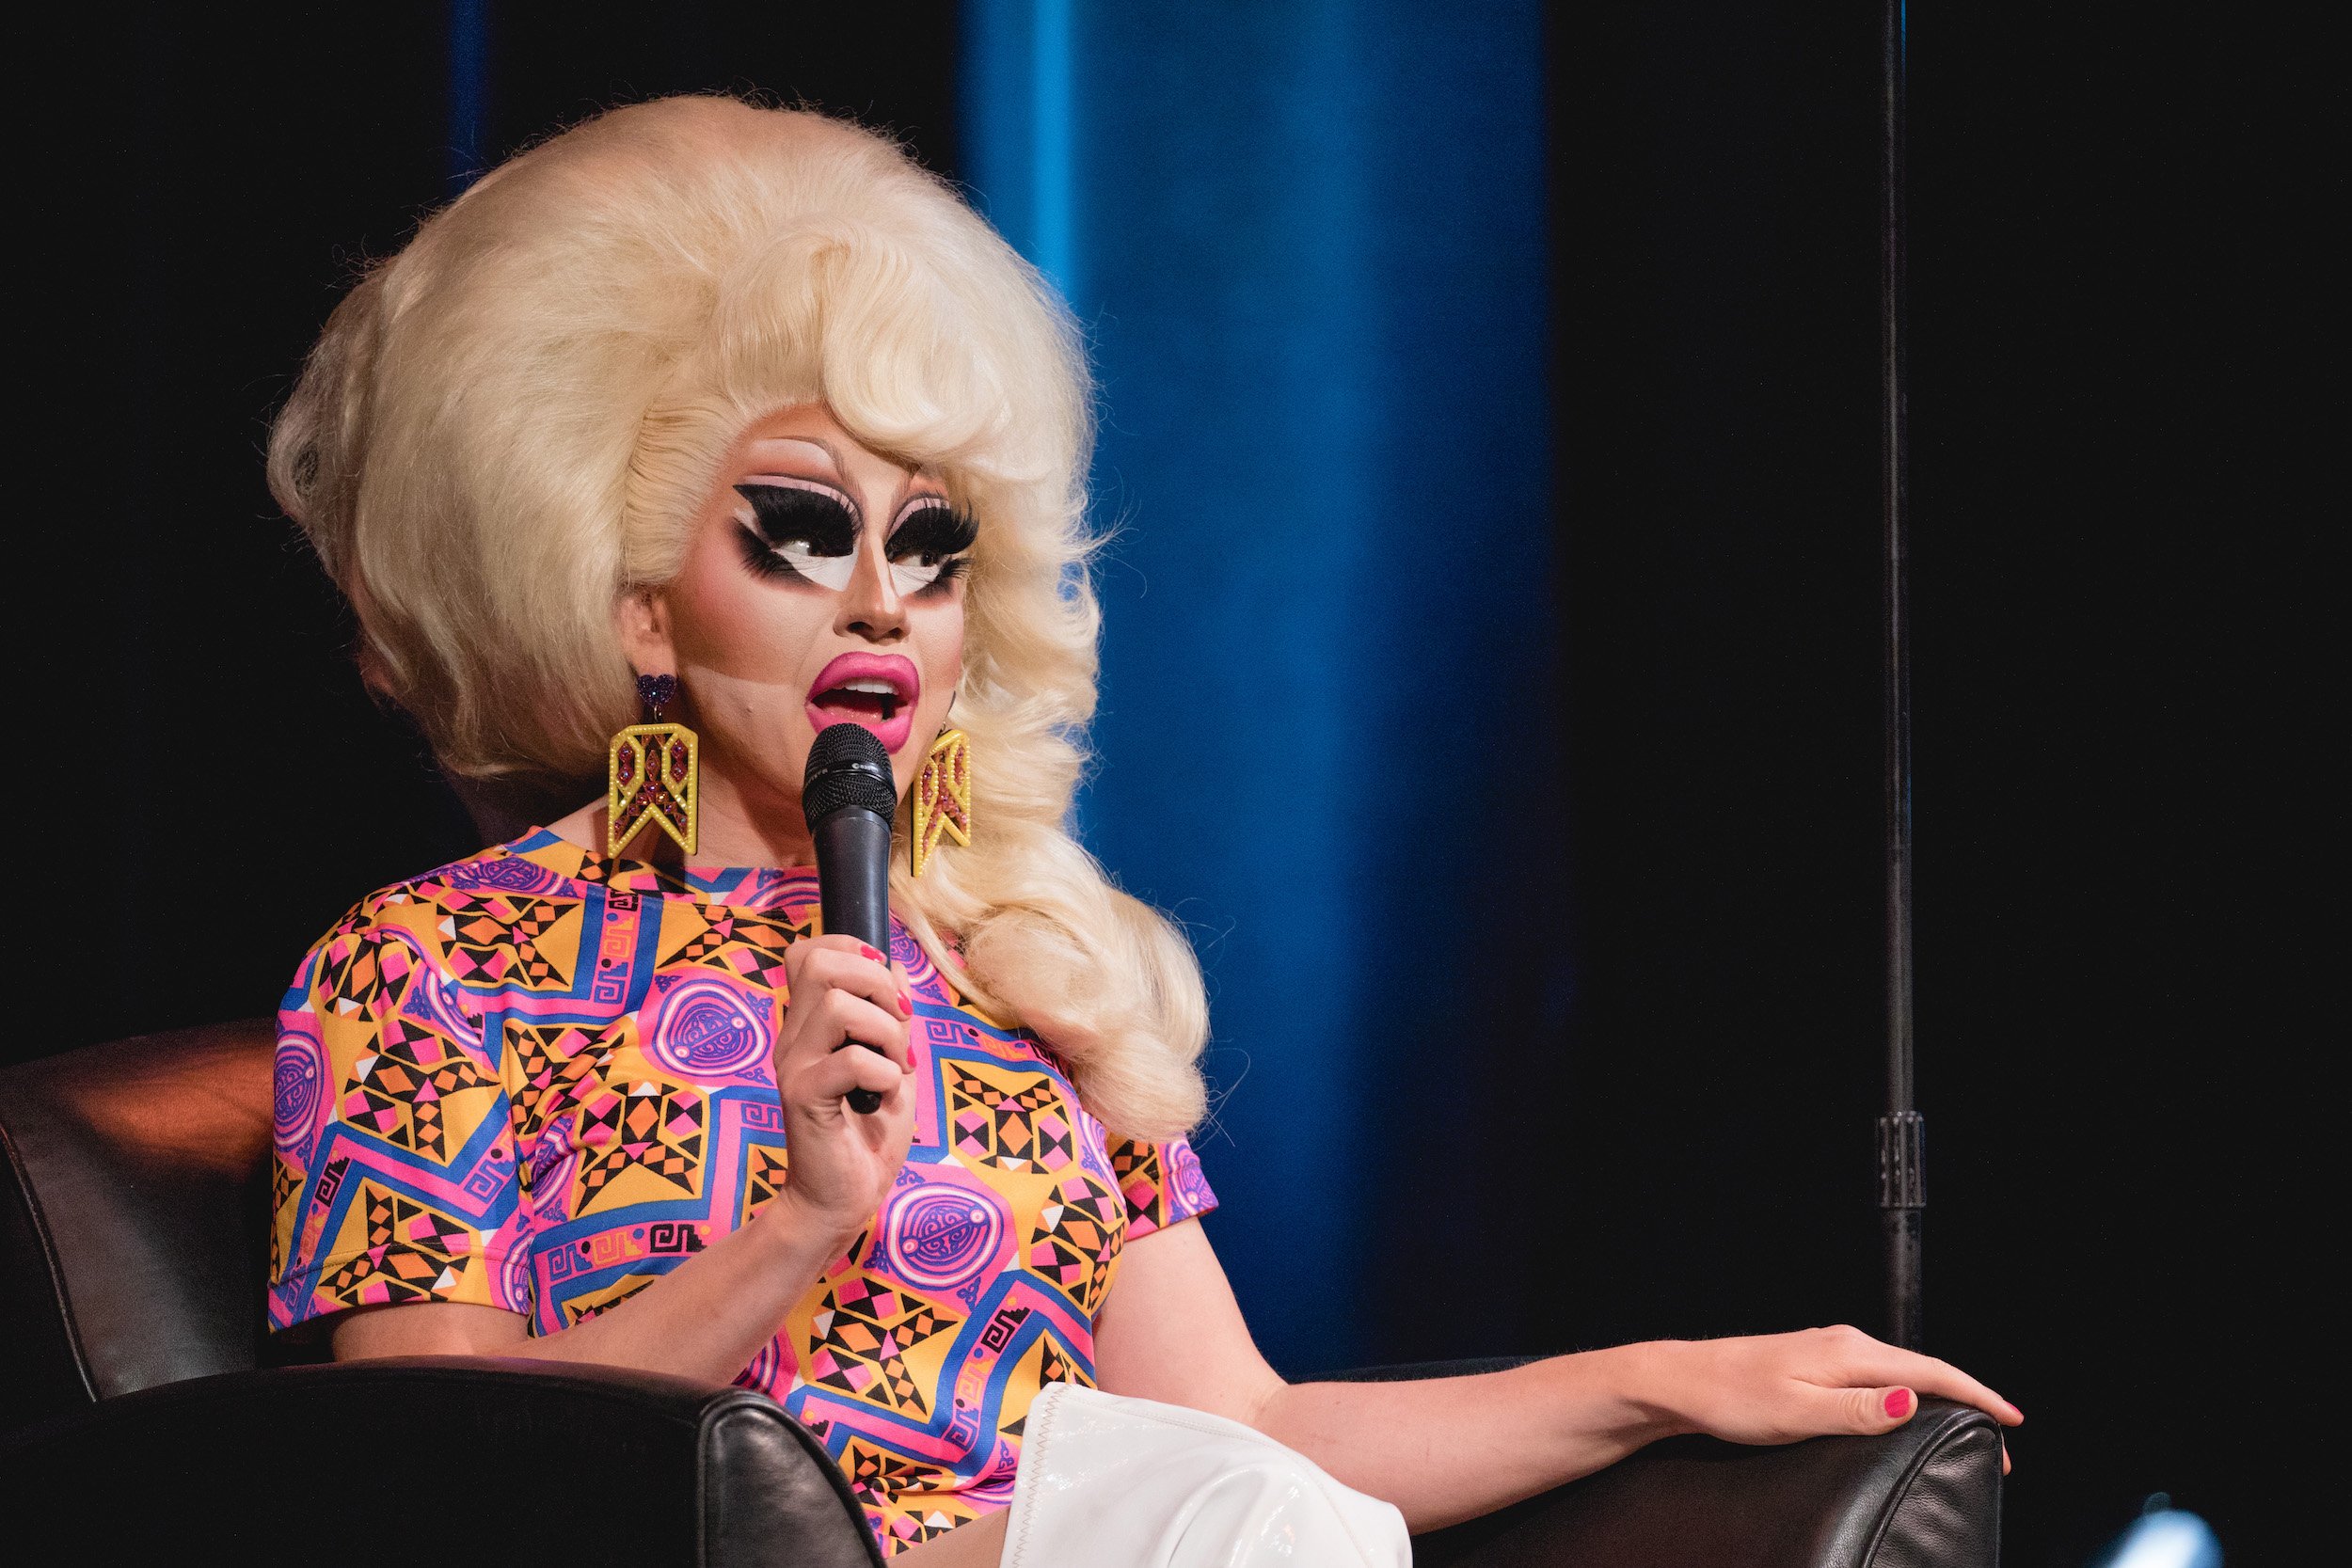 American drag queen Trixie Mattel records an episode of 'The Bald and the Beautiful with Trixie Mattel and Katya Zamo' during Moontower Just For Laughs